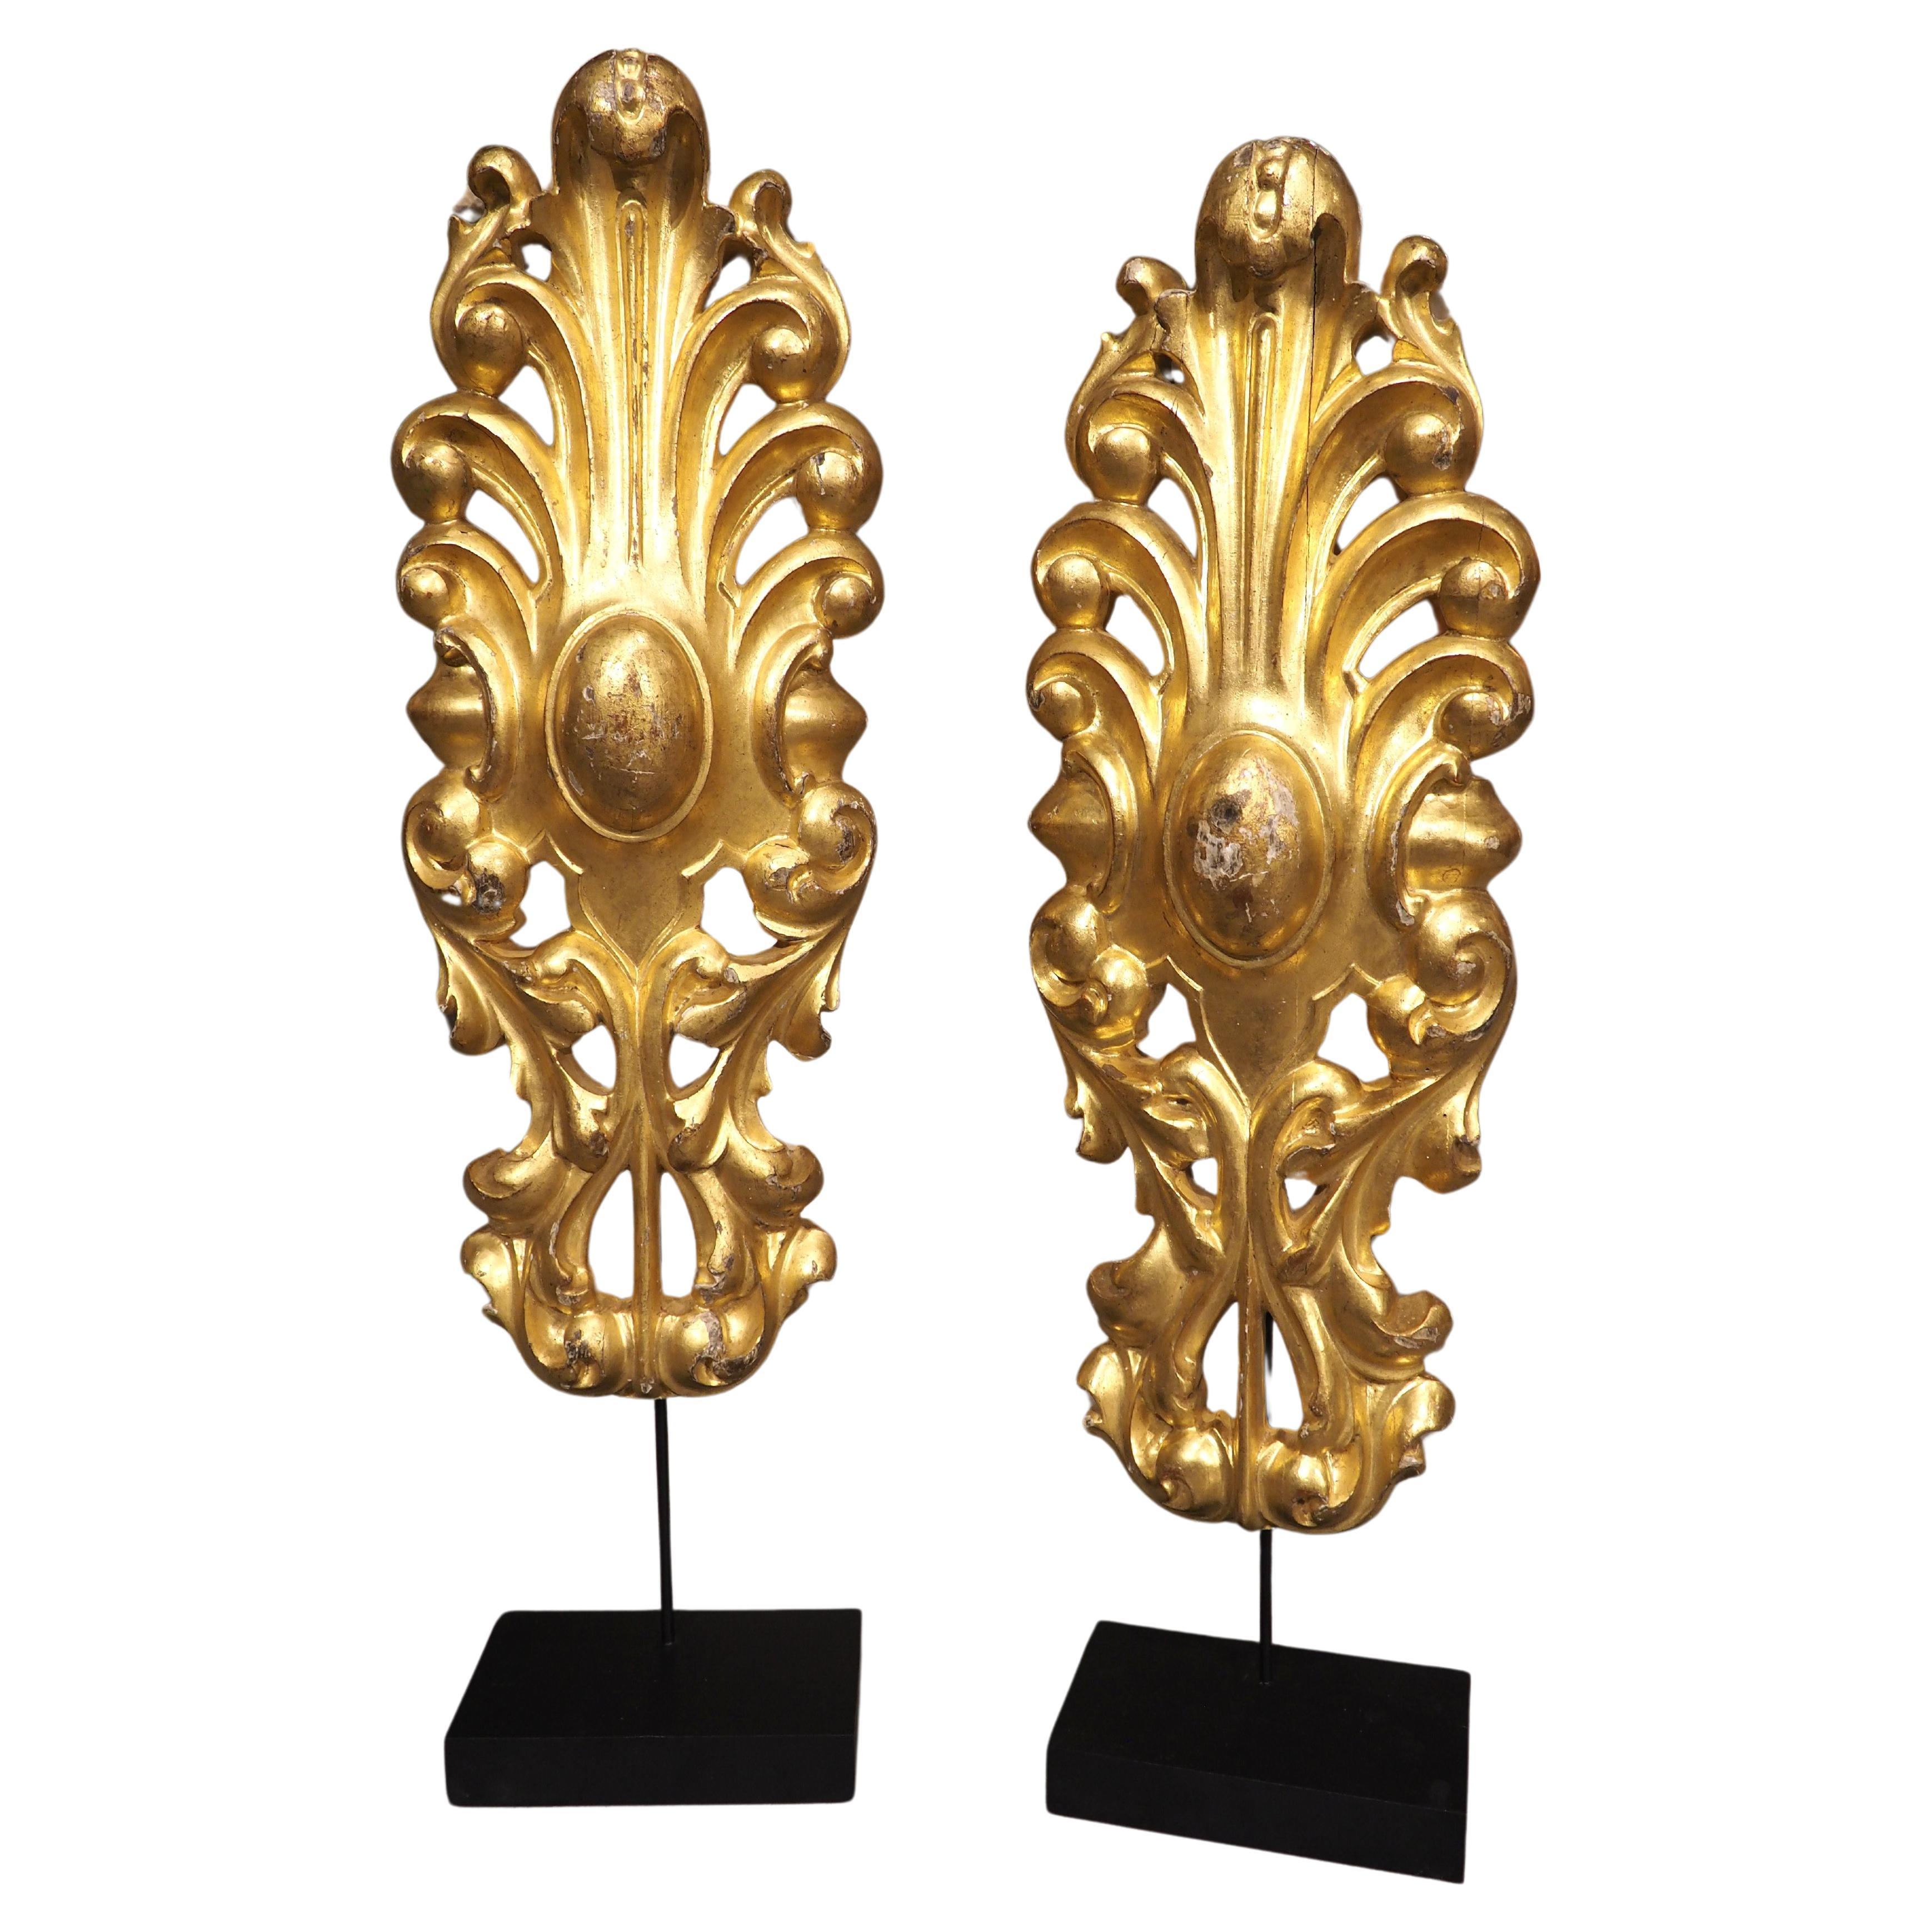 Pair of Late 18th Century Italian Neoclassical Giltwood Fragments